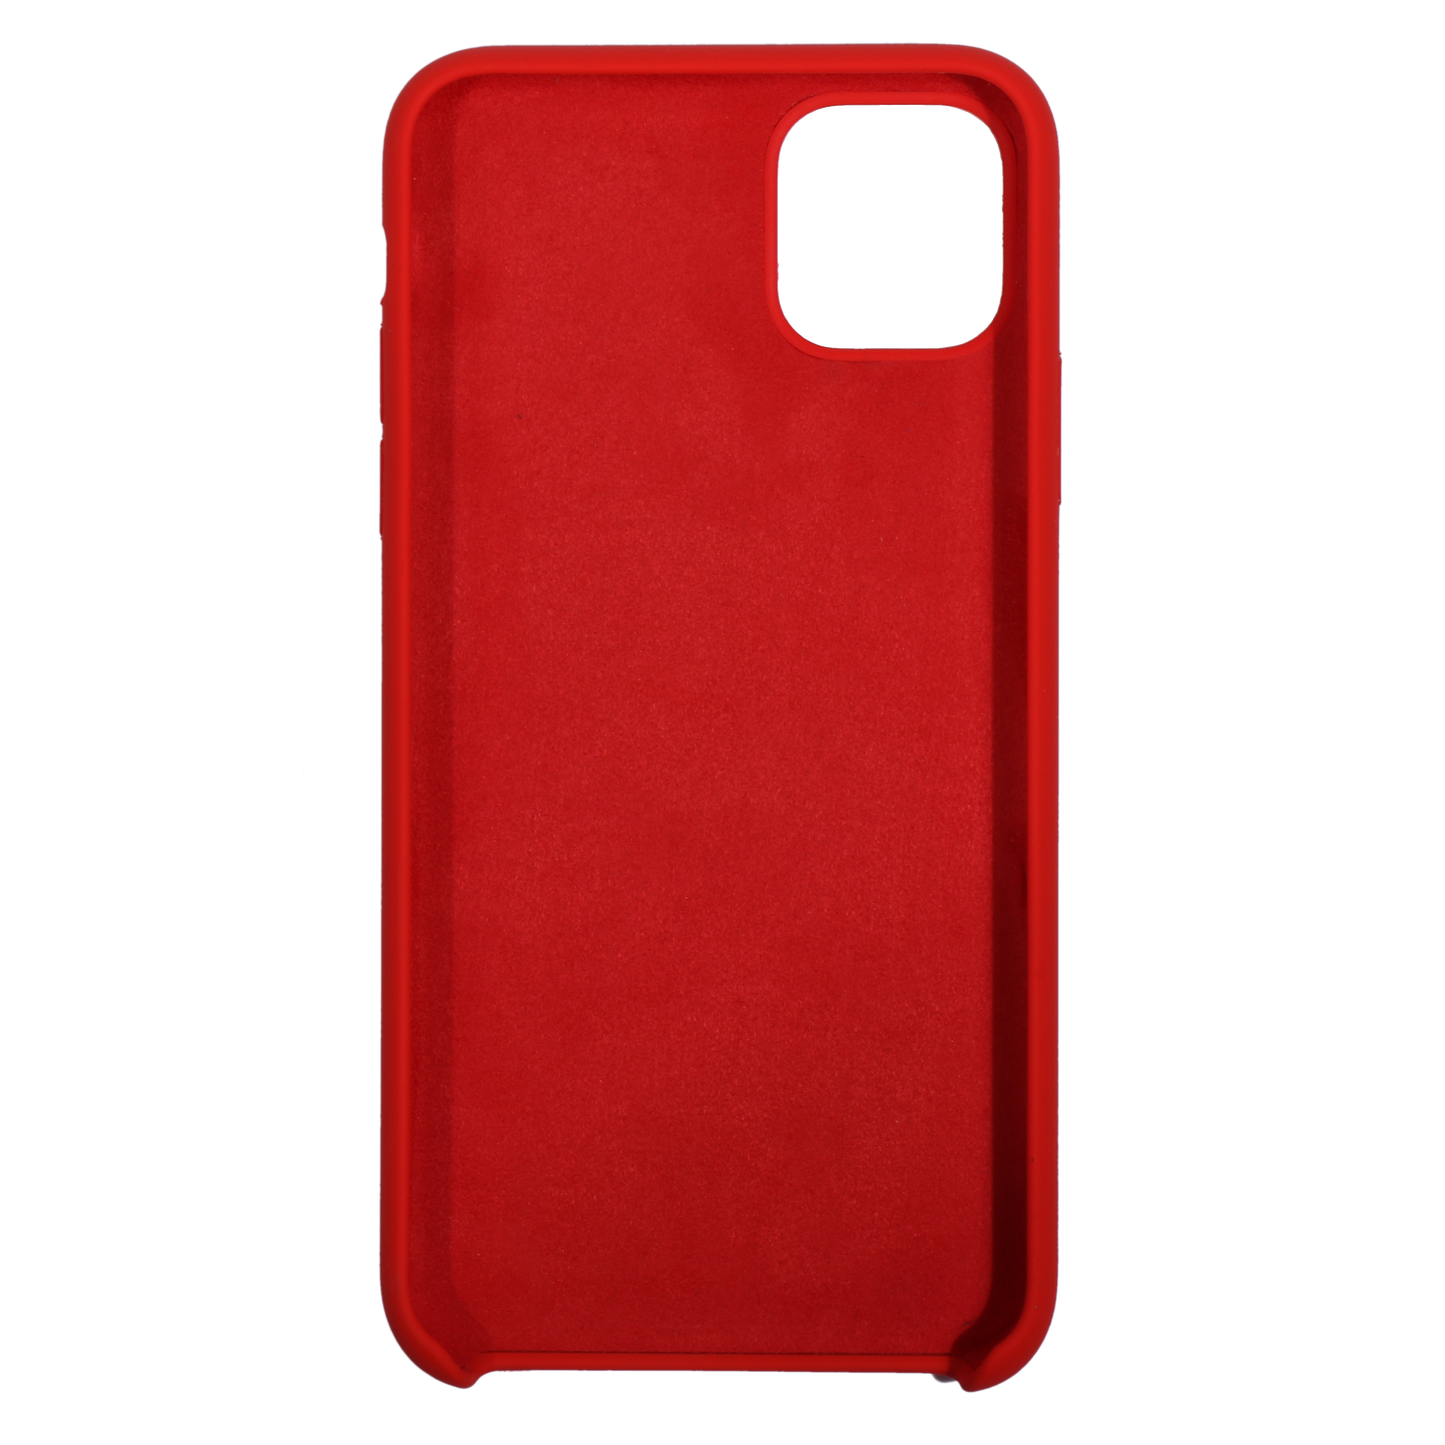 NEXT.ONE Silicone case red for iPhone 11